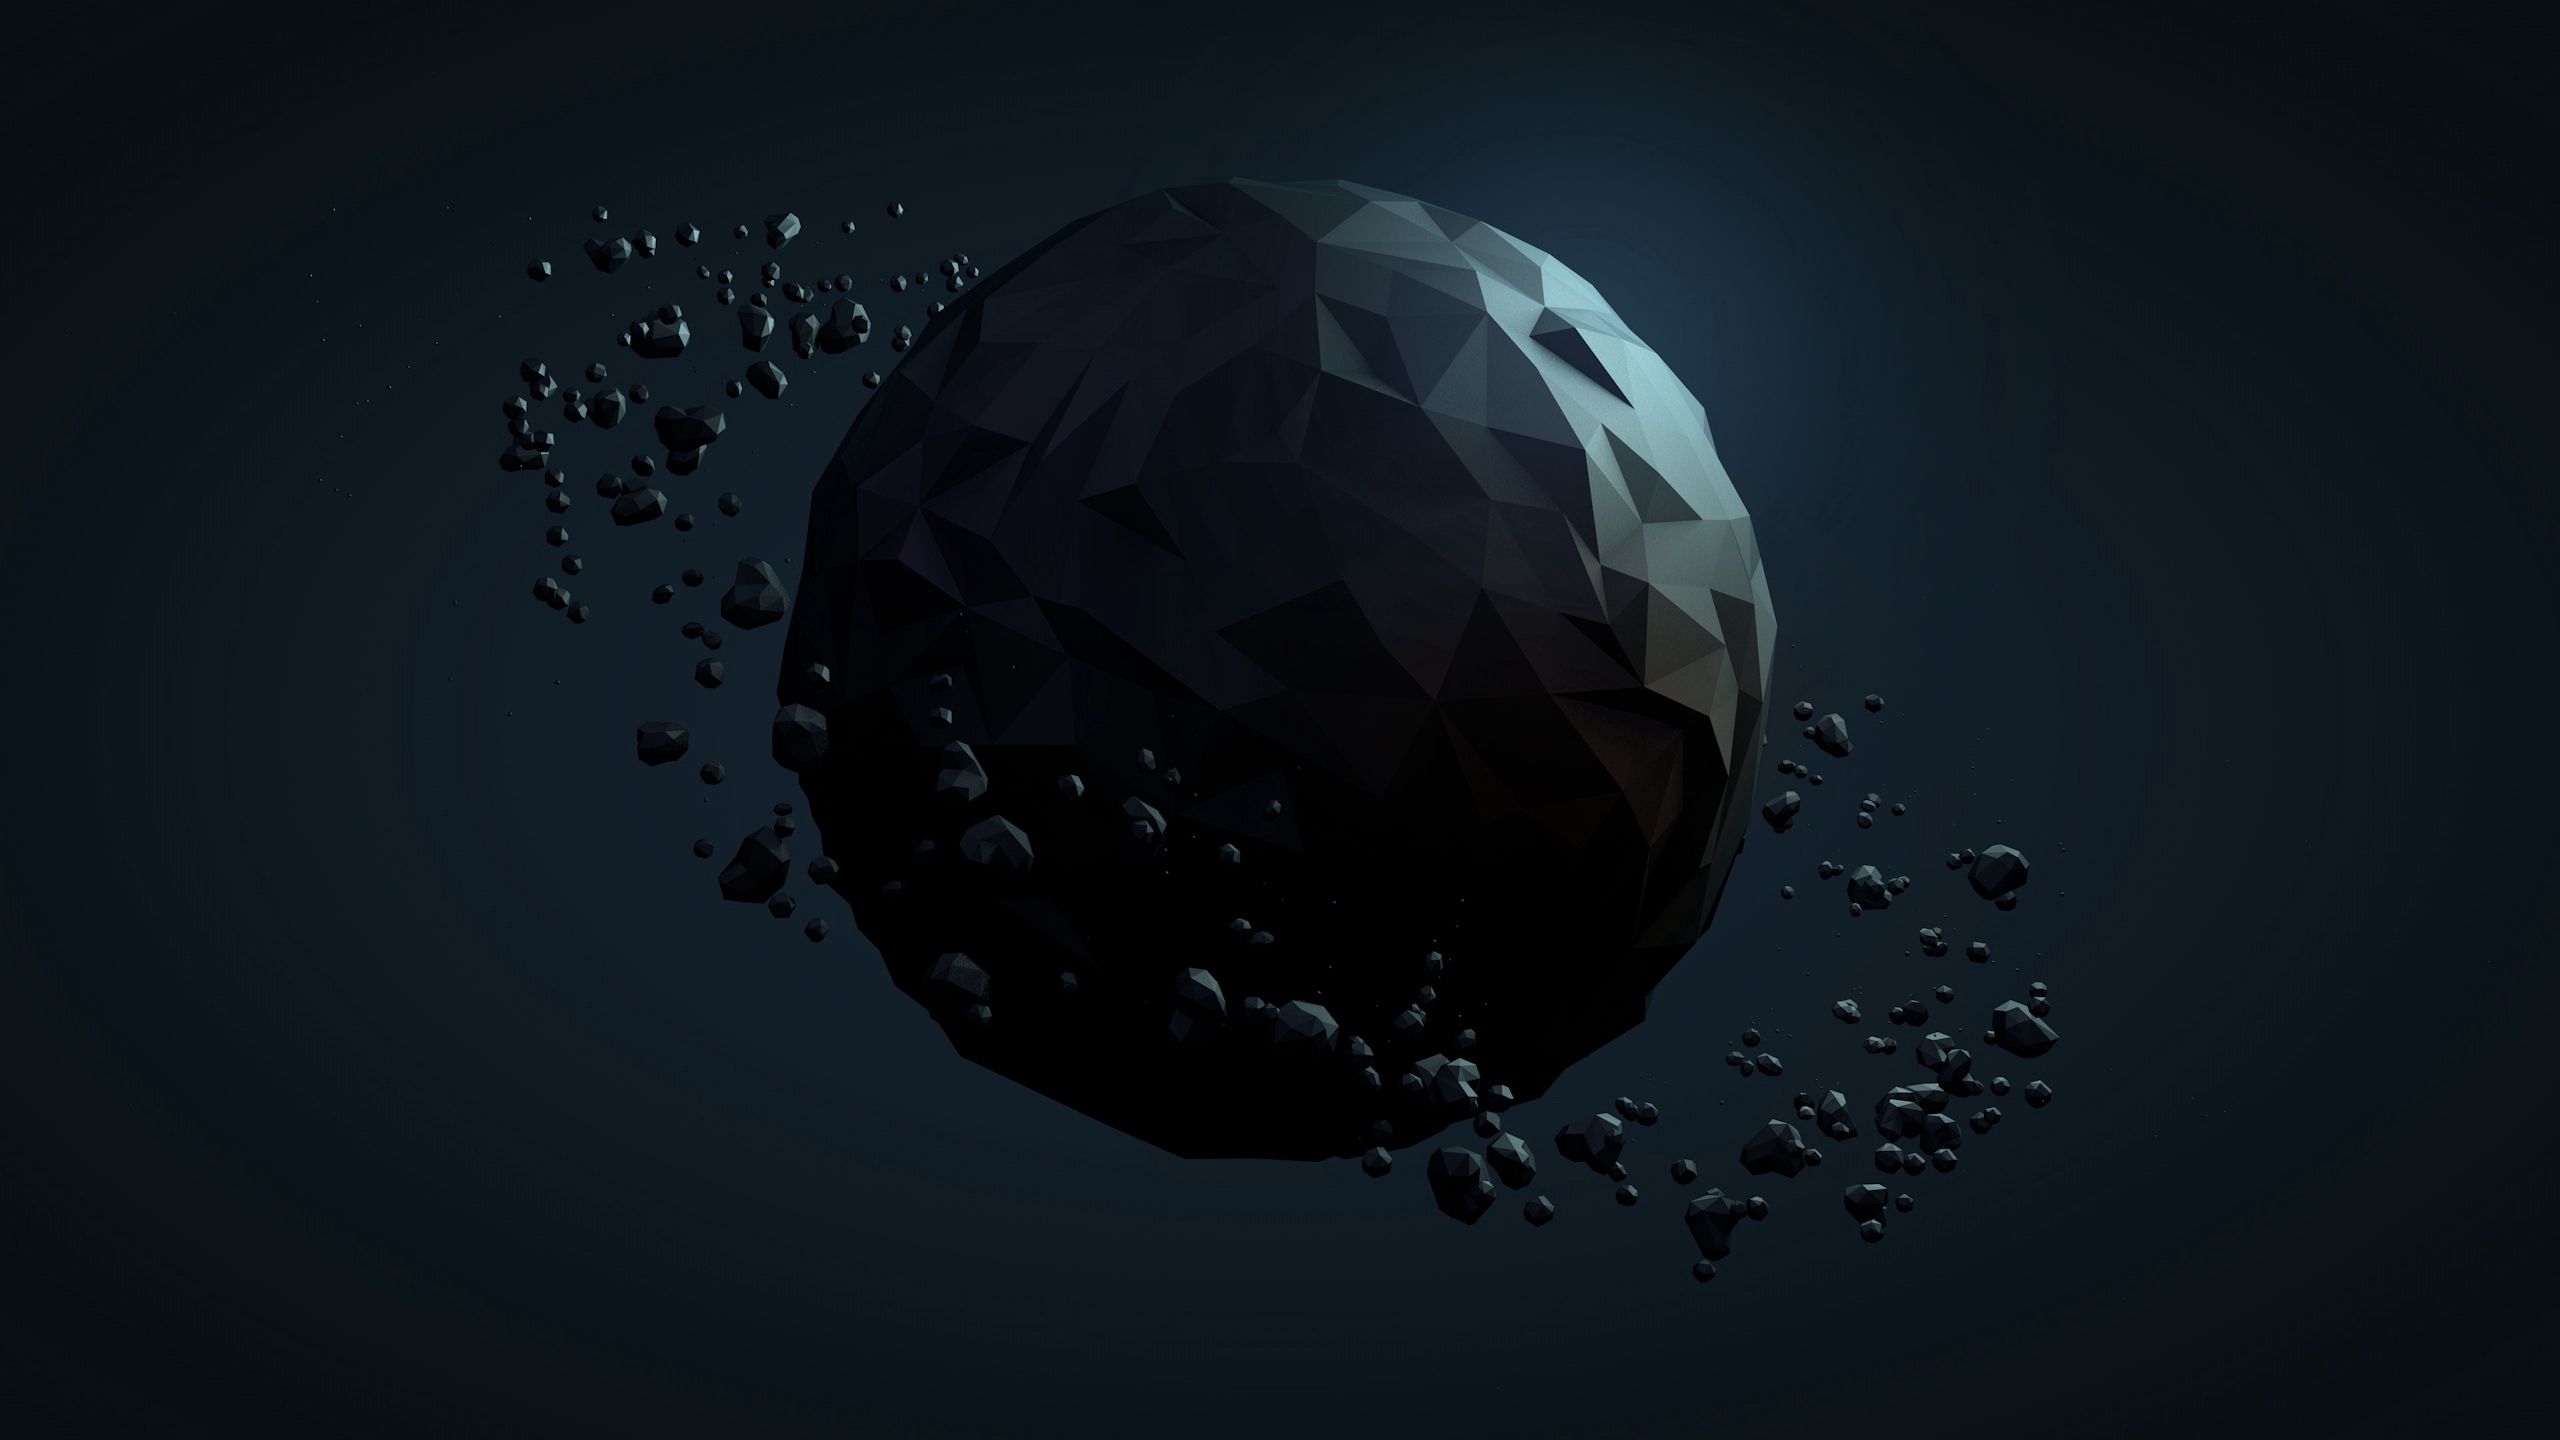 desktop Images dark, abstract, background, ball, planet